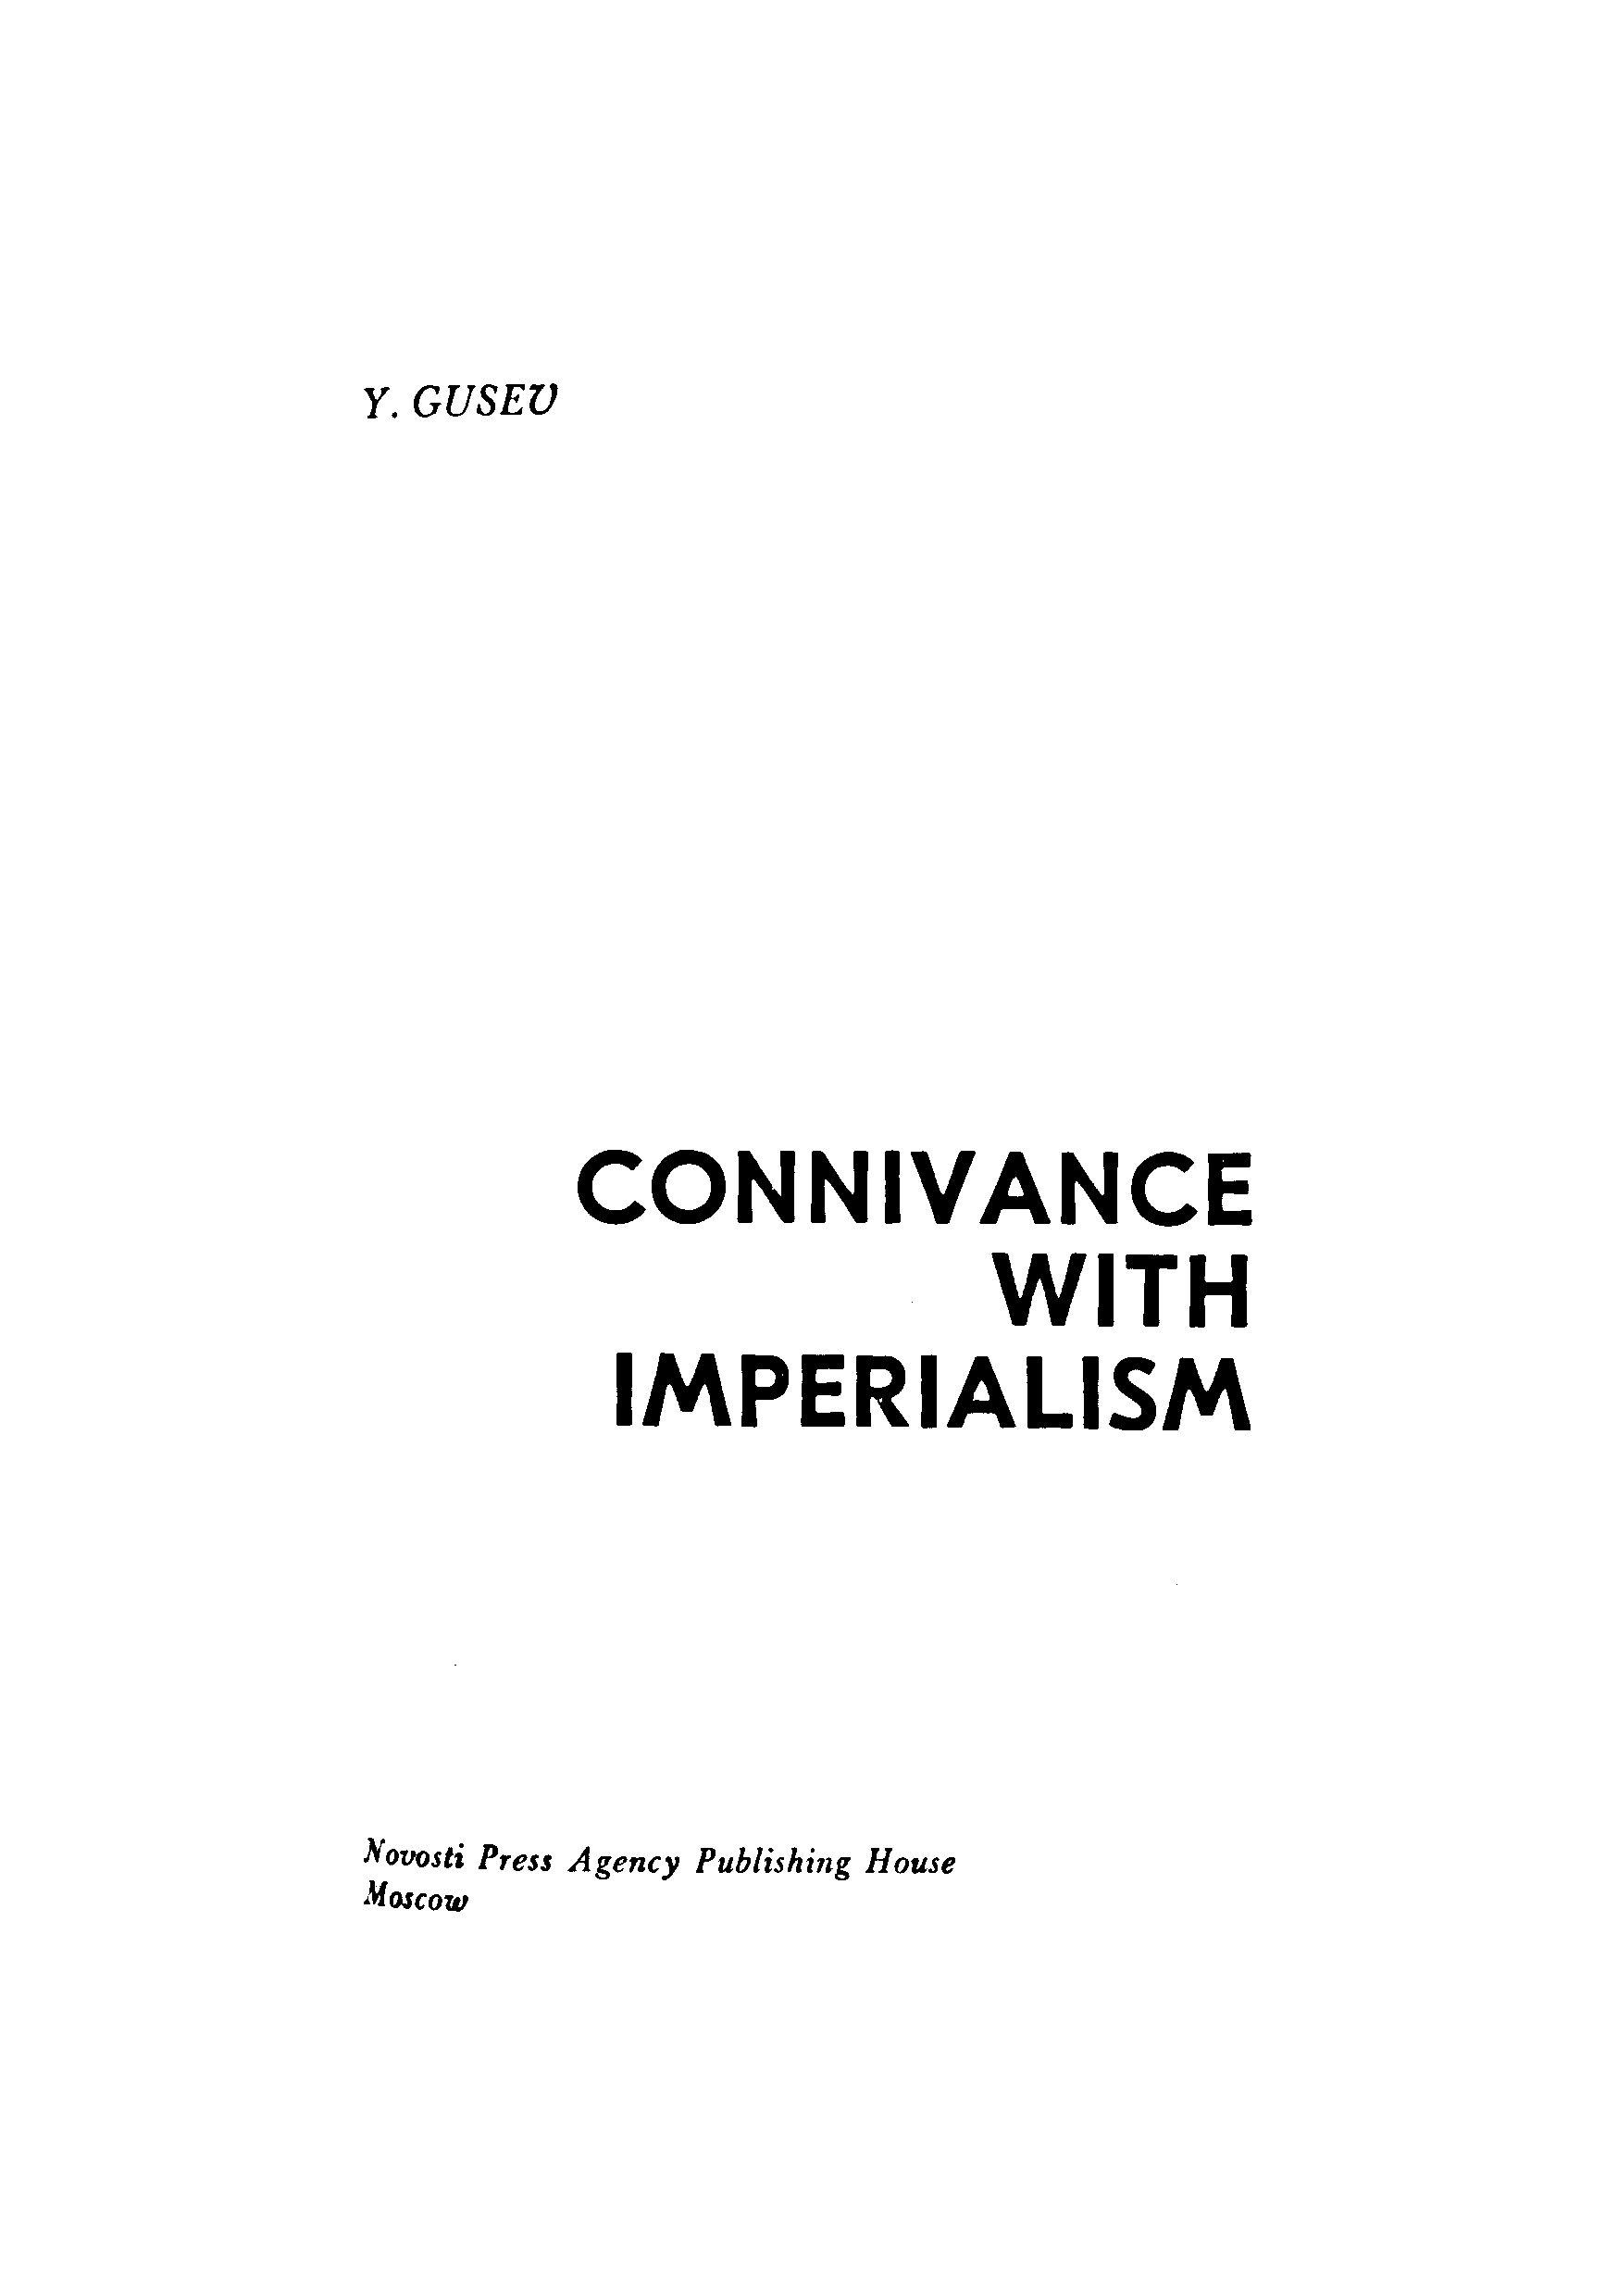 Connivance with imperialism